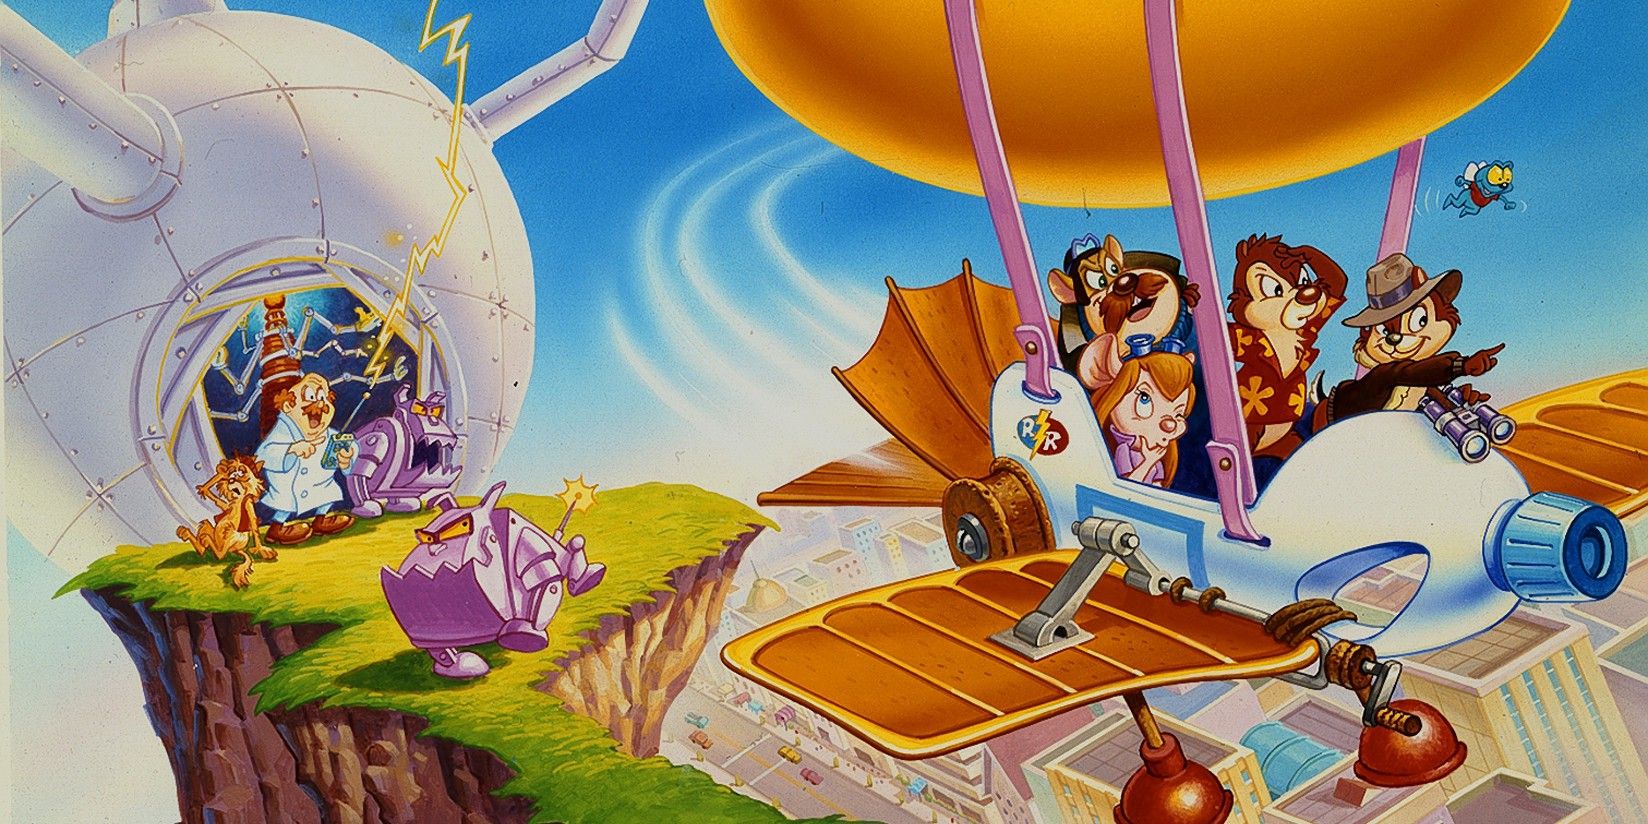 The main characters from Chip N' Dale Rescue Rangers in a plane